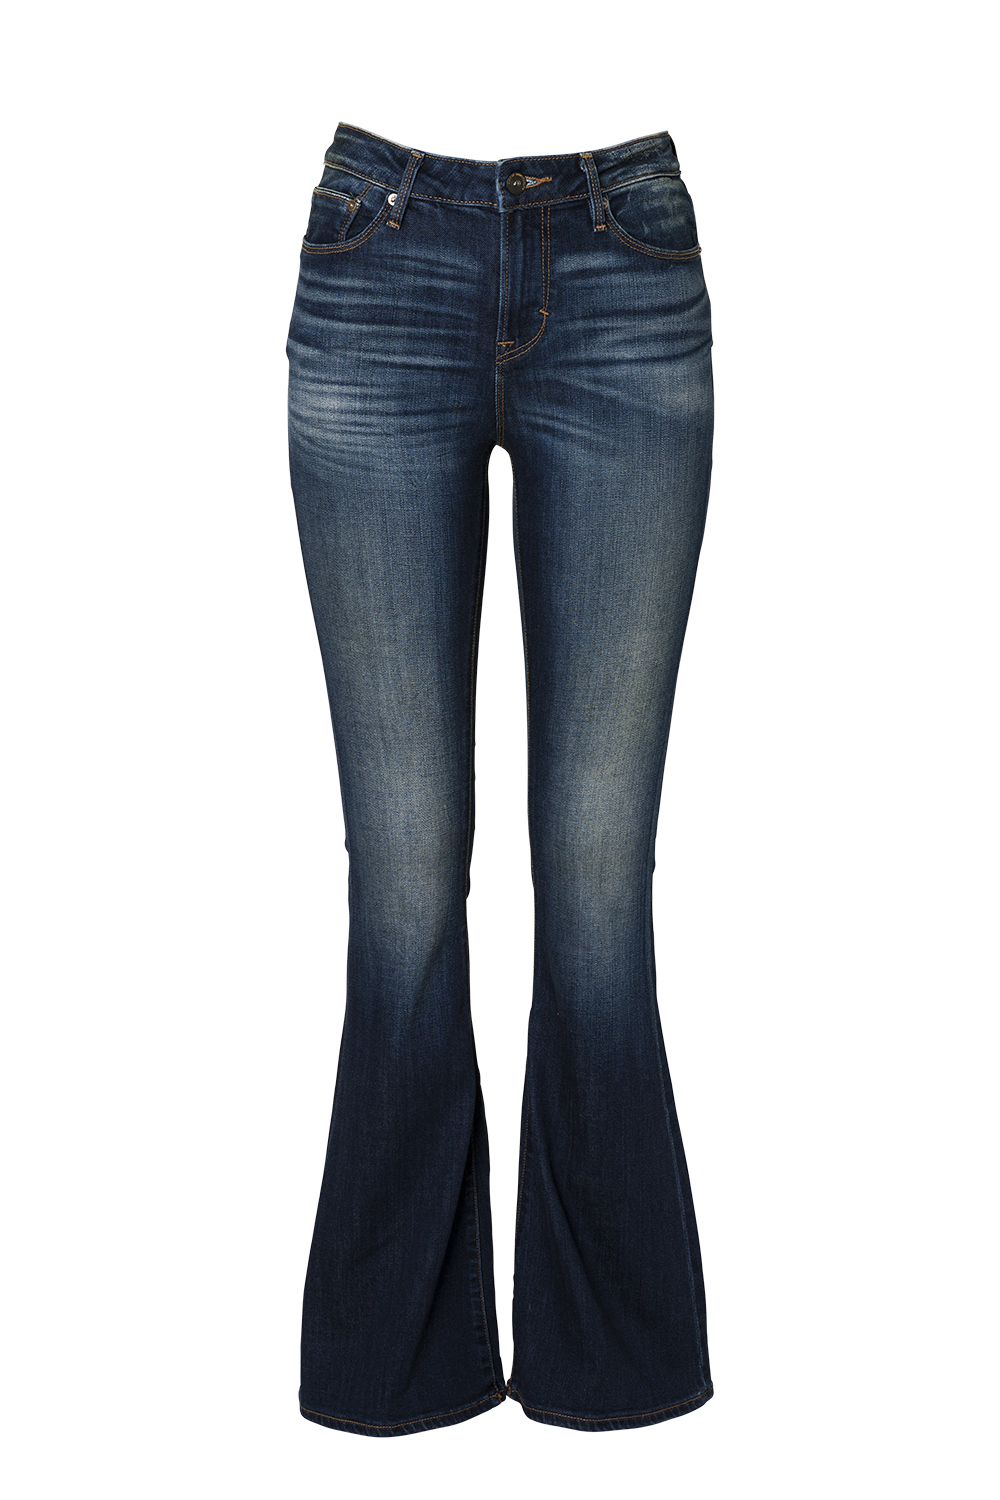 Jeans, $285, by Cult Of Individuality.